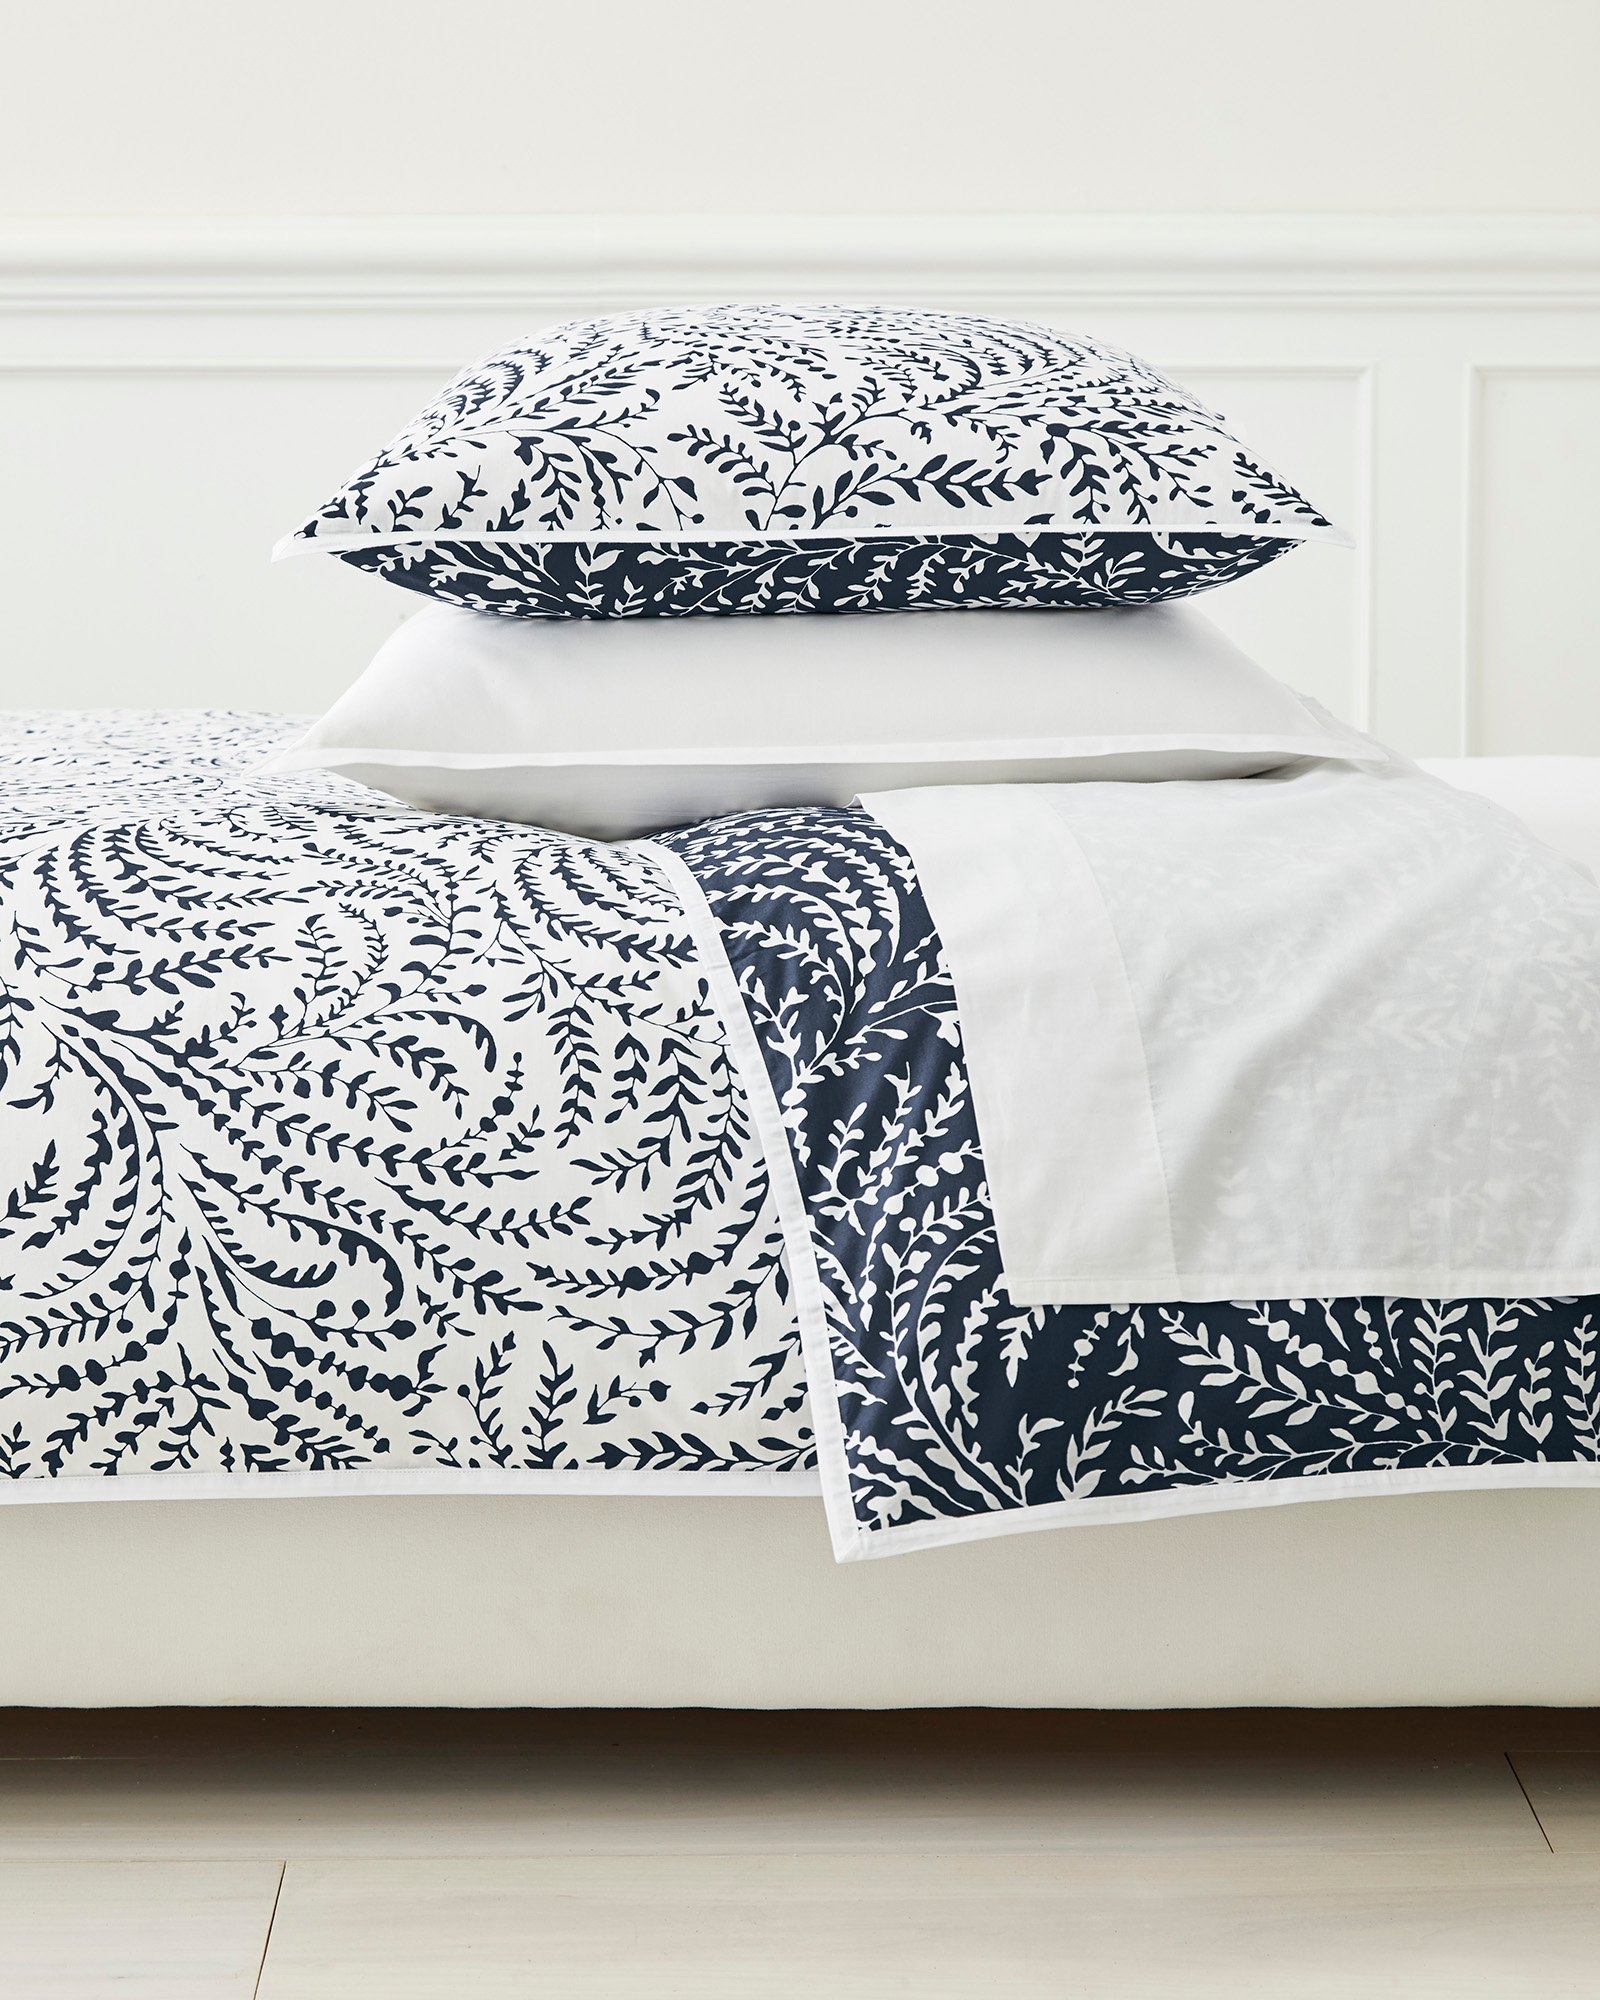 Priano Full/Queen Duvet Cover - Navy - Insert sold separately - Image 1